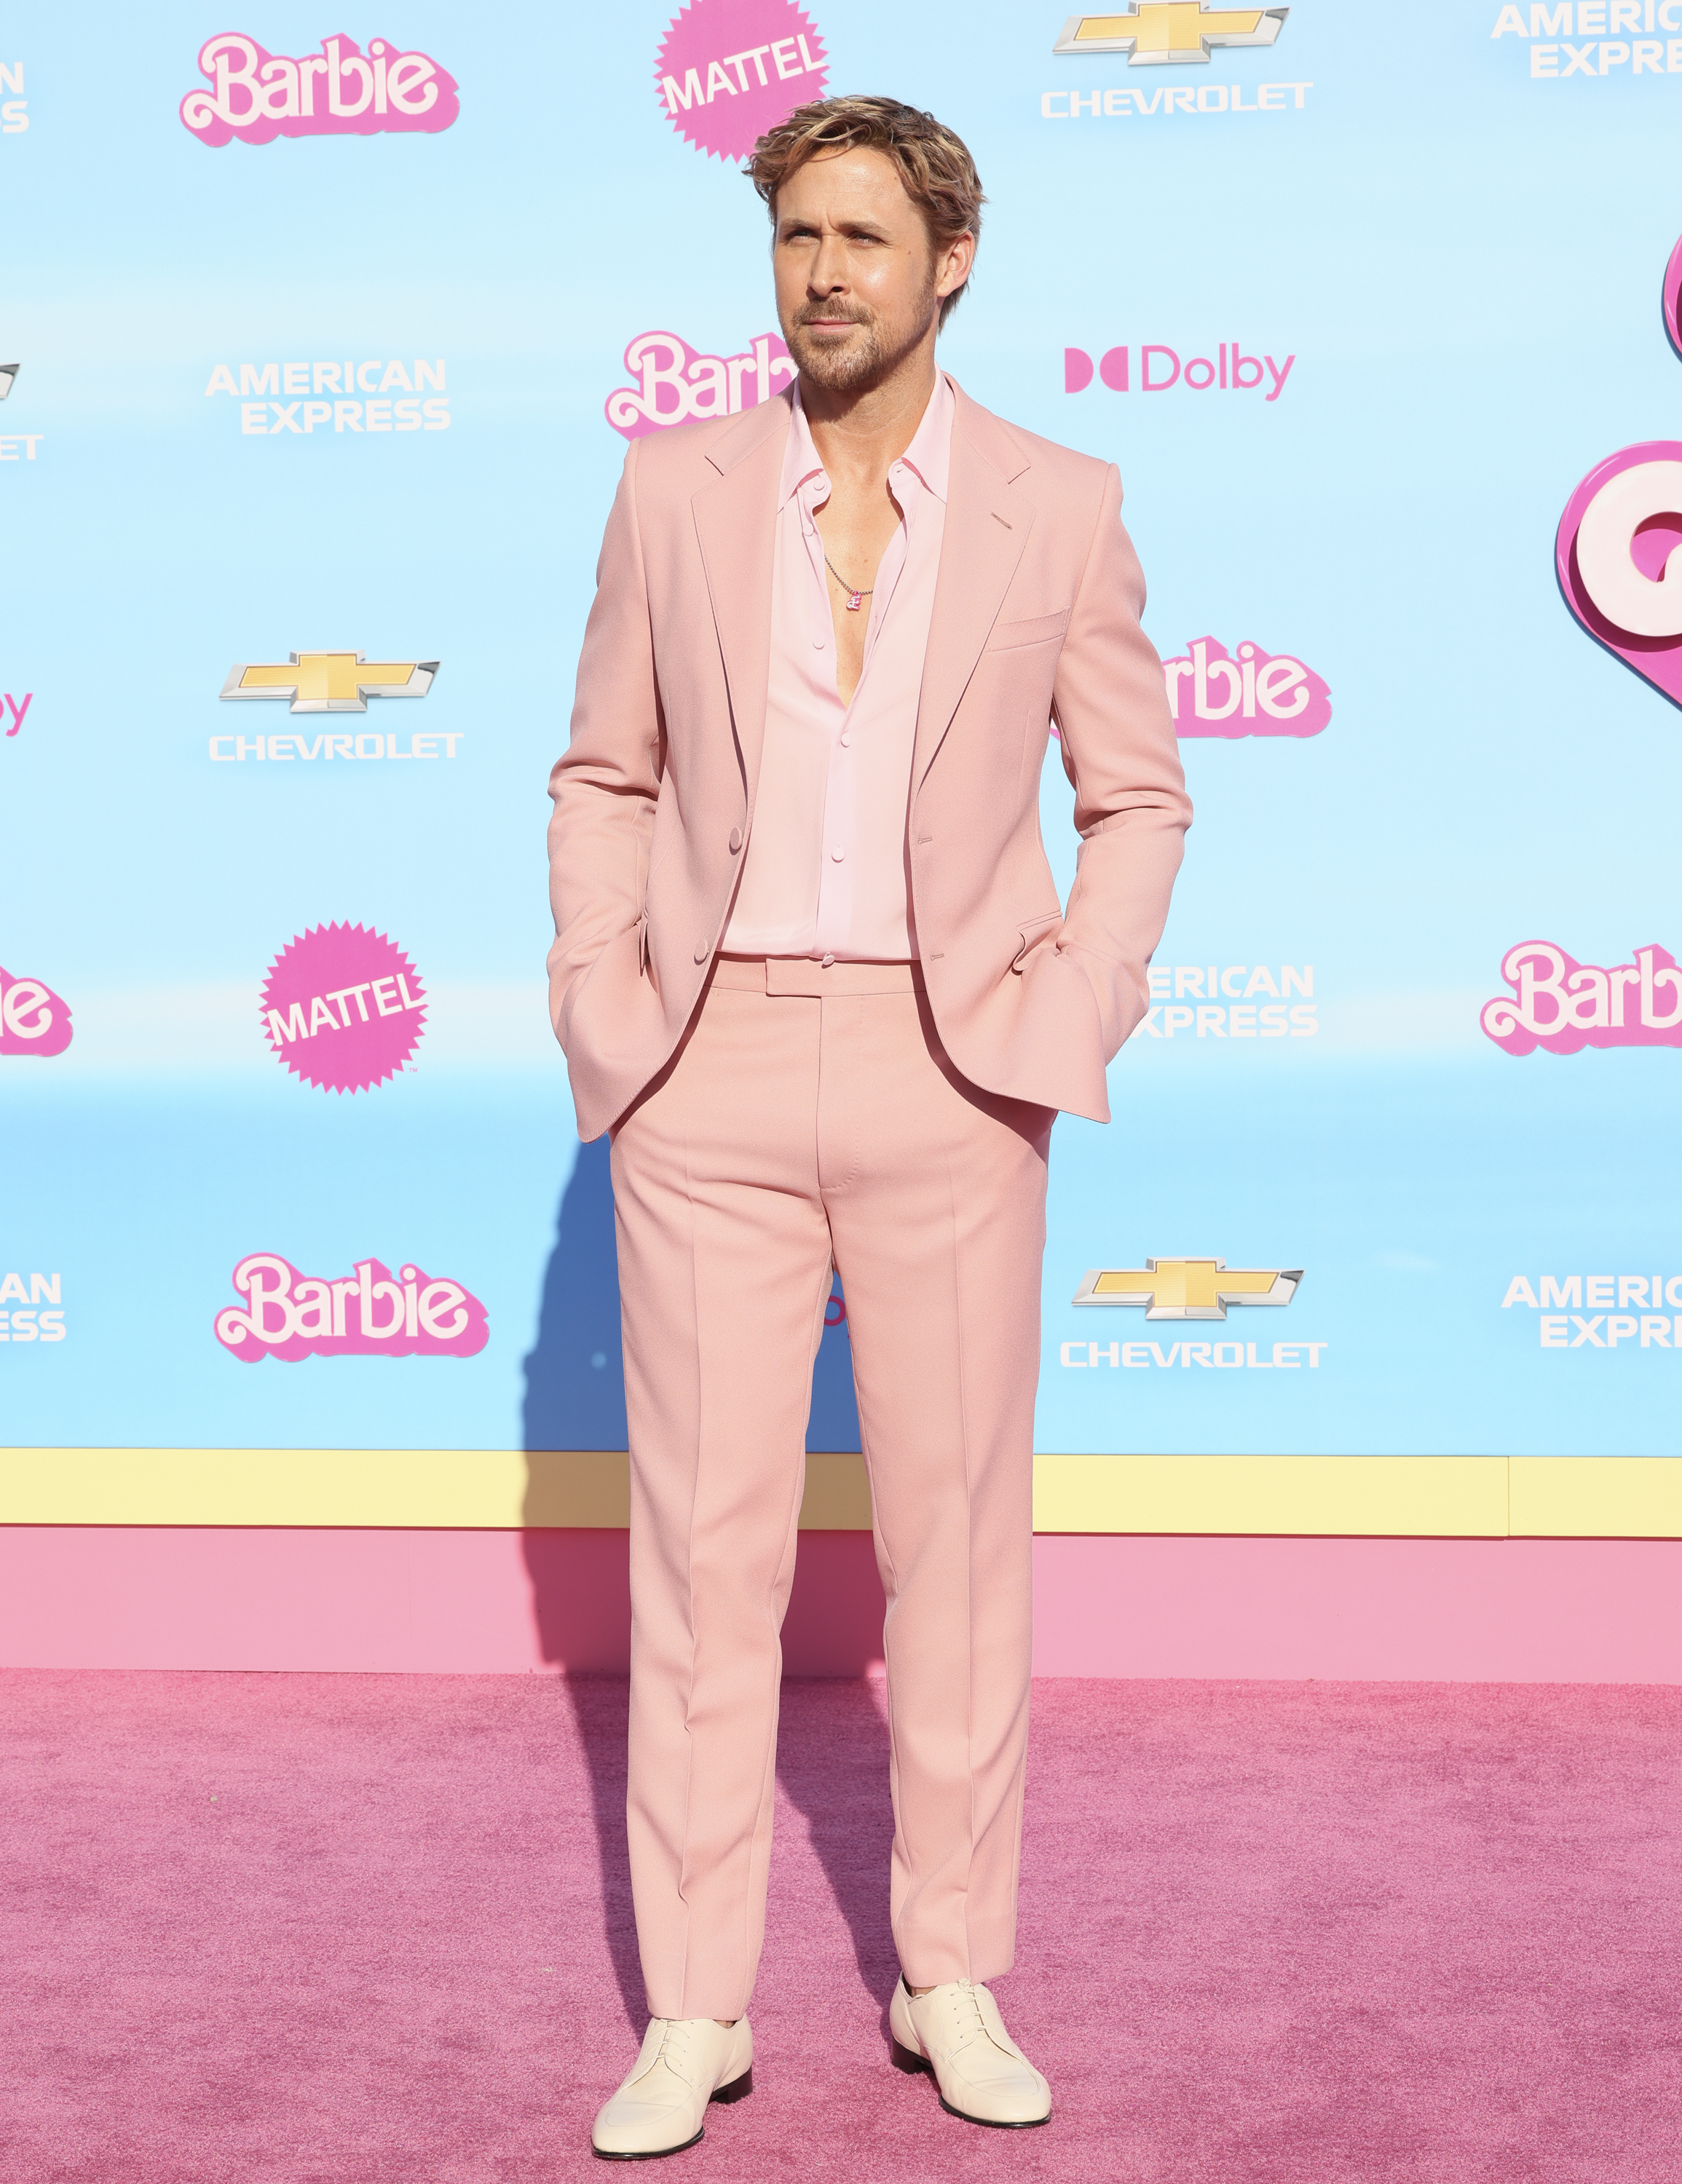 Ryan Gosling at the World Premiere of "Barbie" on July 9, 2023, in Los Angeles, California | Source: Getty Images